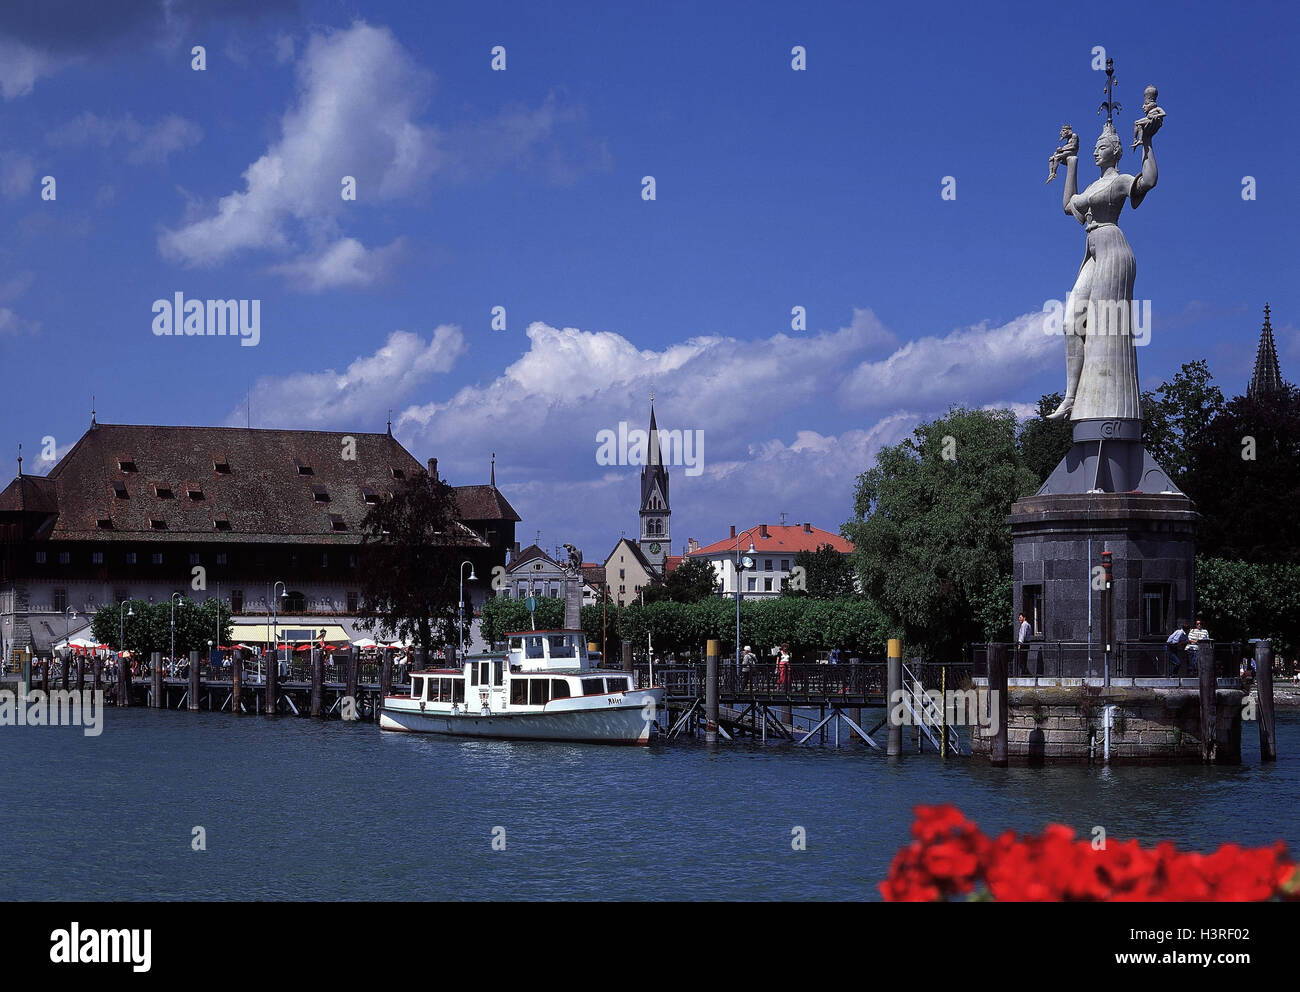 Germany, Lake Constance, Constance, harbour, statue Imperia, council house, Europe, Baden-Wurttemberg, Lake Constance circle, Super Swabian Barockstrasse, town, town view, port entrance, Imperia-Statue, artist Peter Lenk, landing stage, excursion boat, ch Stock Photo